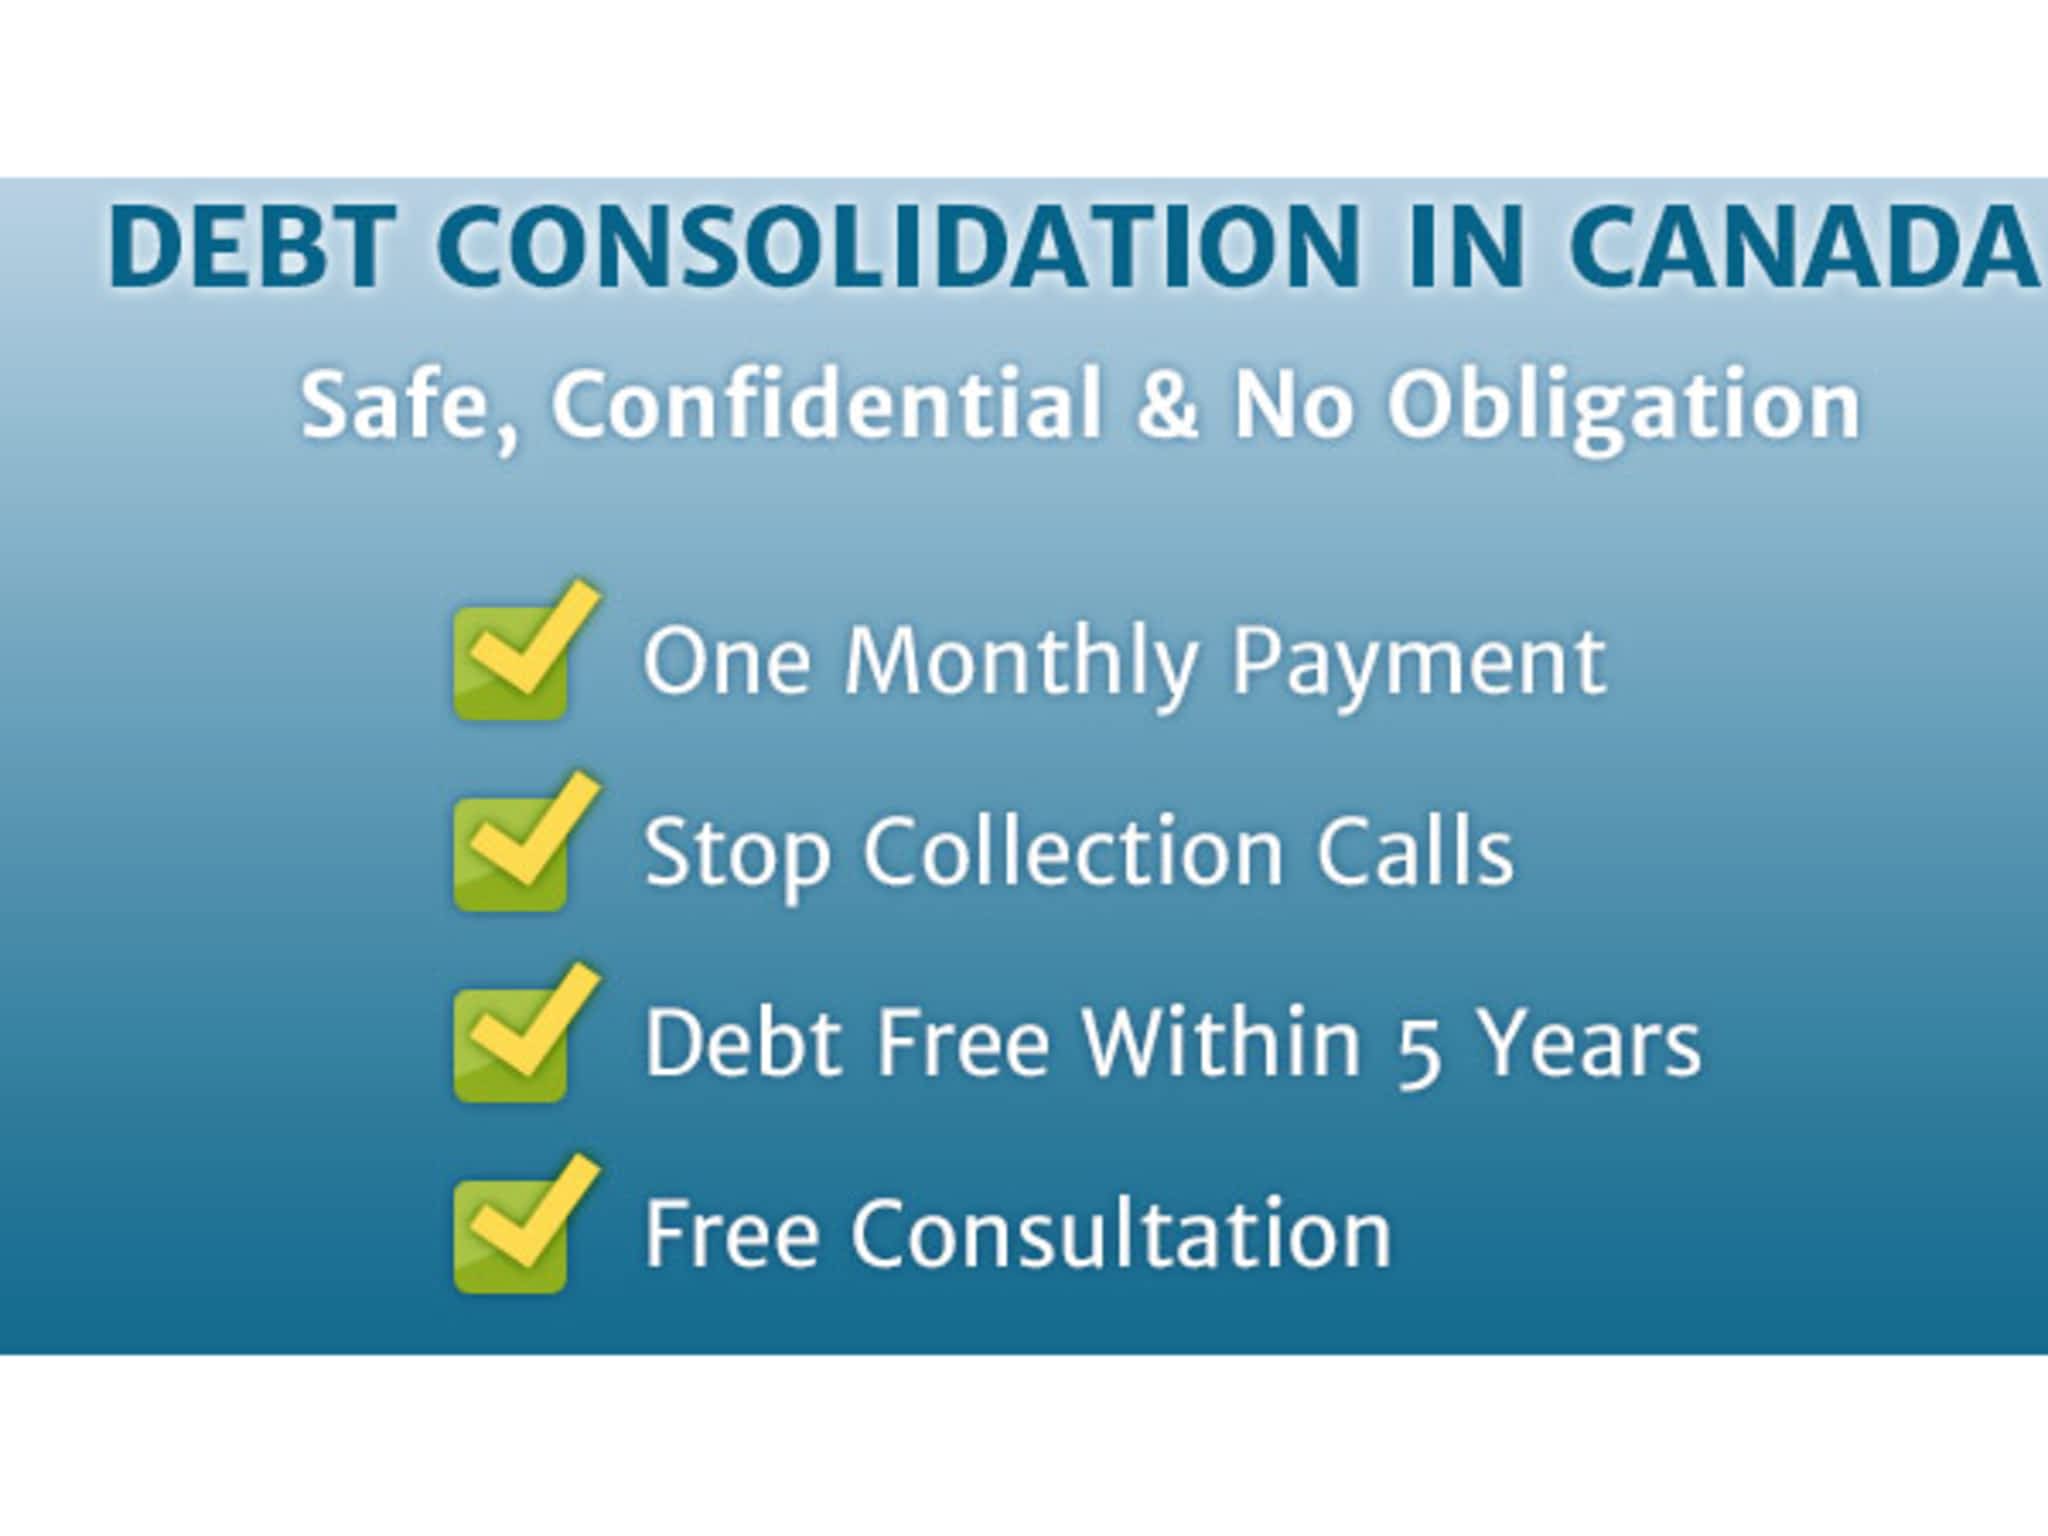 photo Canadian Debt Solutions Inc